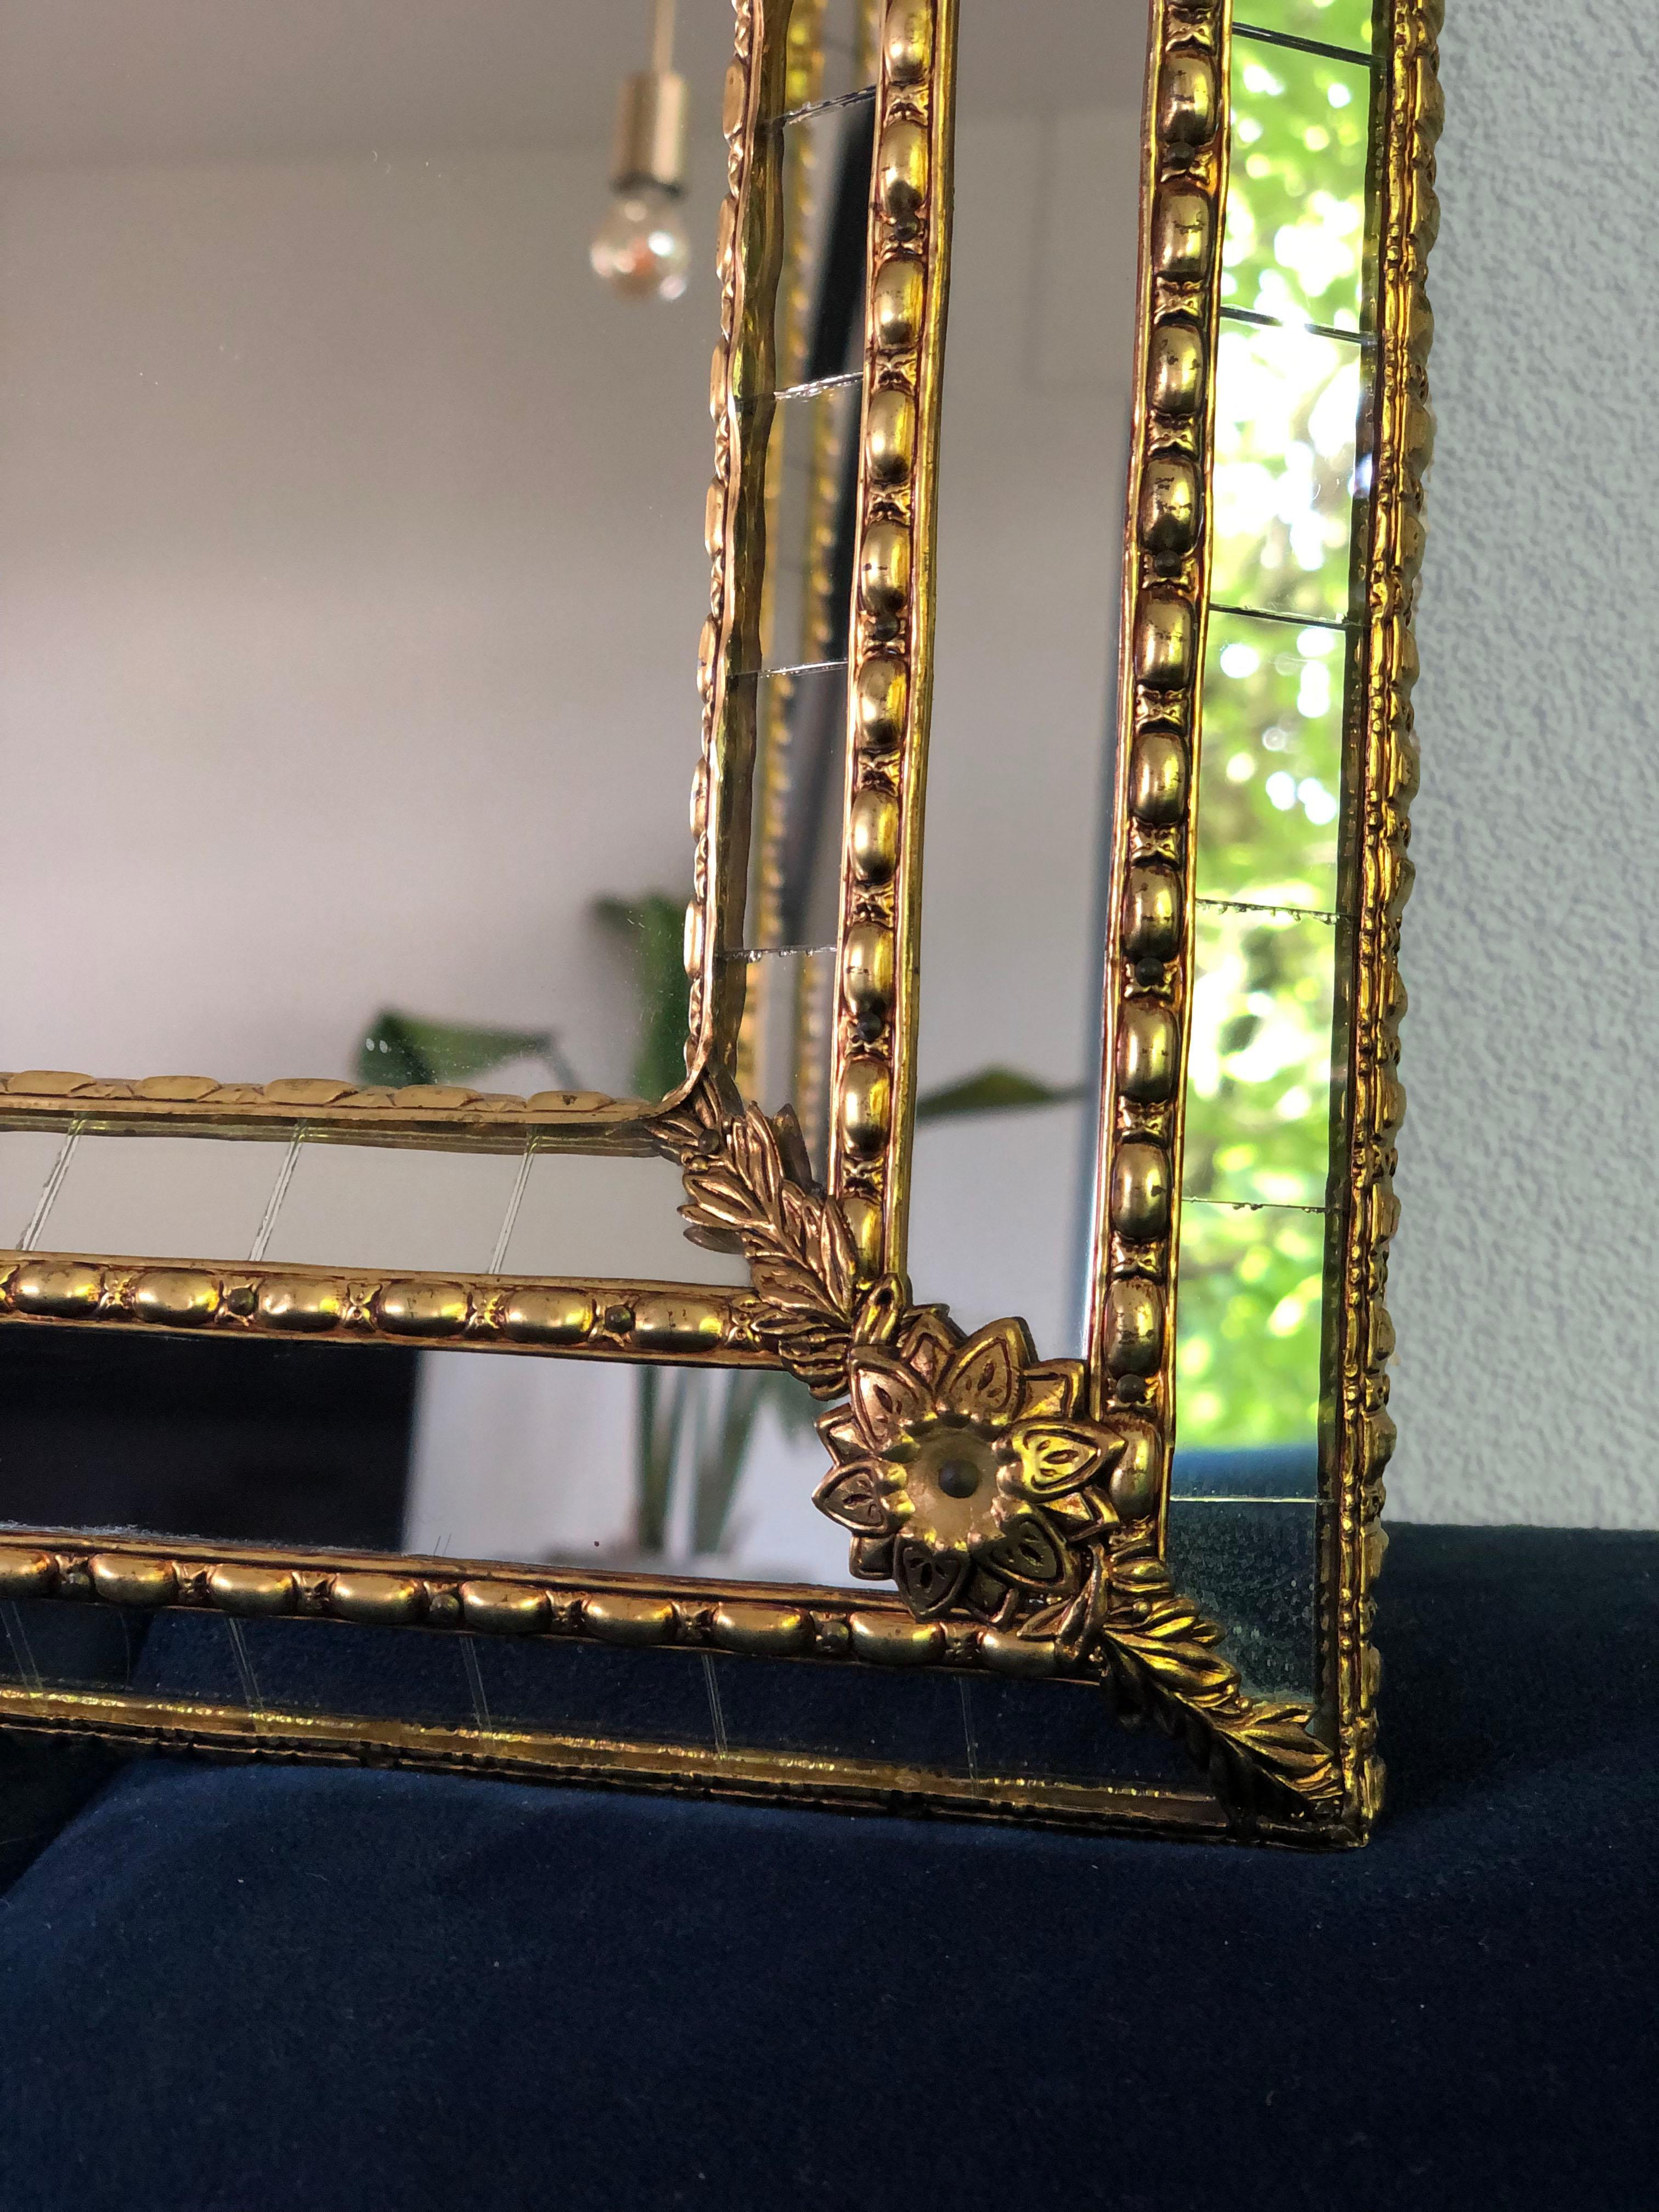 Beautiful handmade Venetian wide full length mirror from Spain 1980s. The frame has cut glass panes across the entire width, which is held together by a brass strip. The flawless trapezoidal mirror has a brass flower at each corner.

Object: